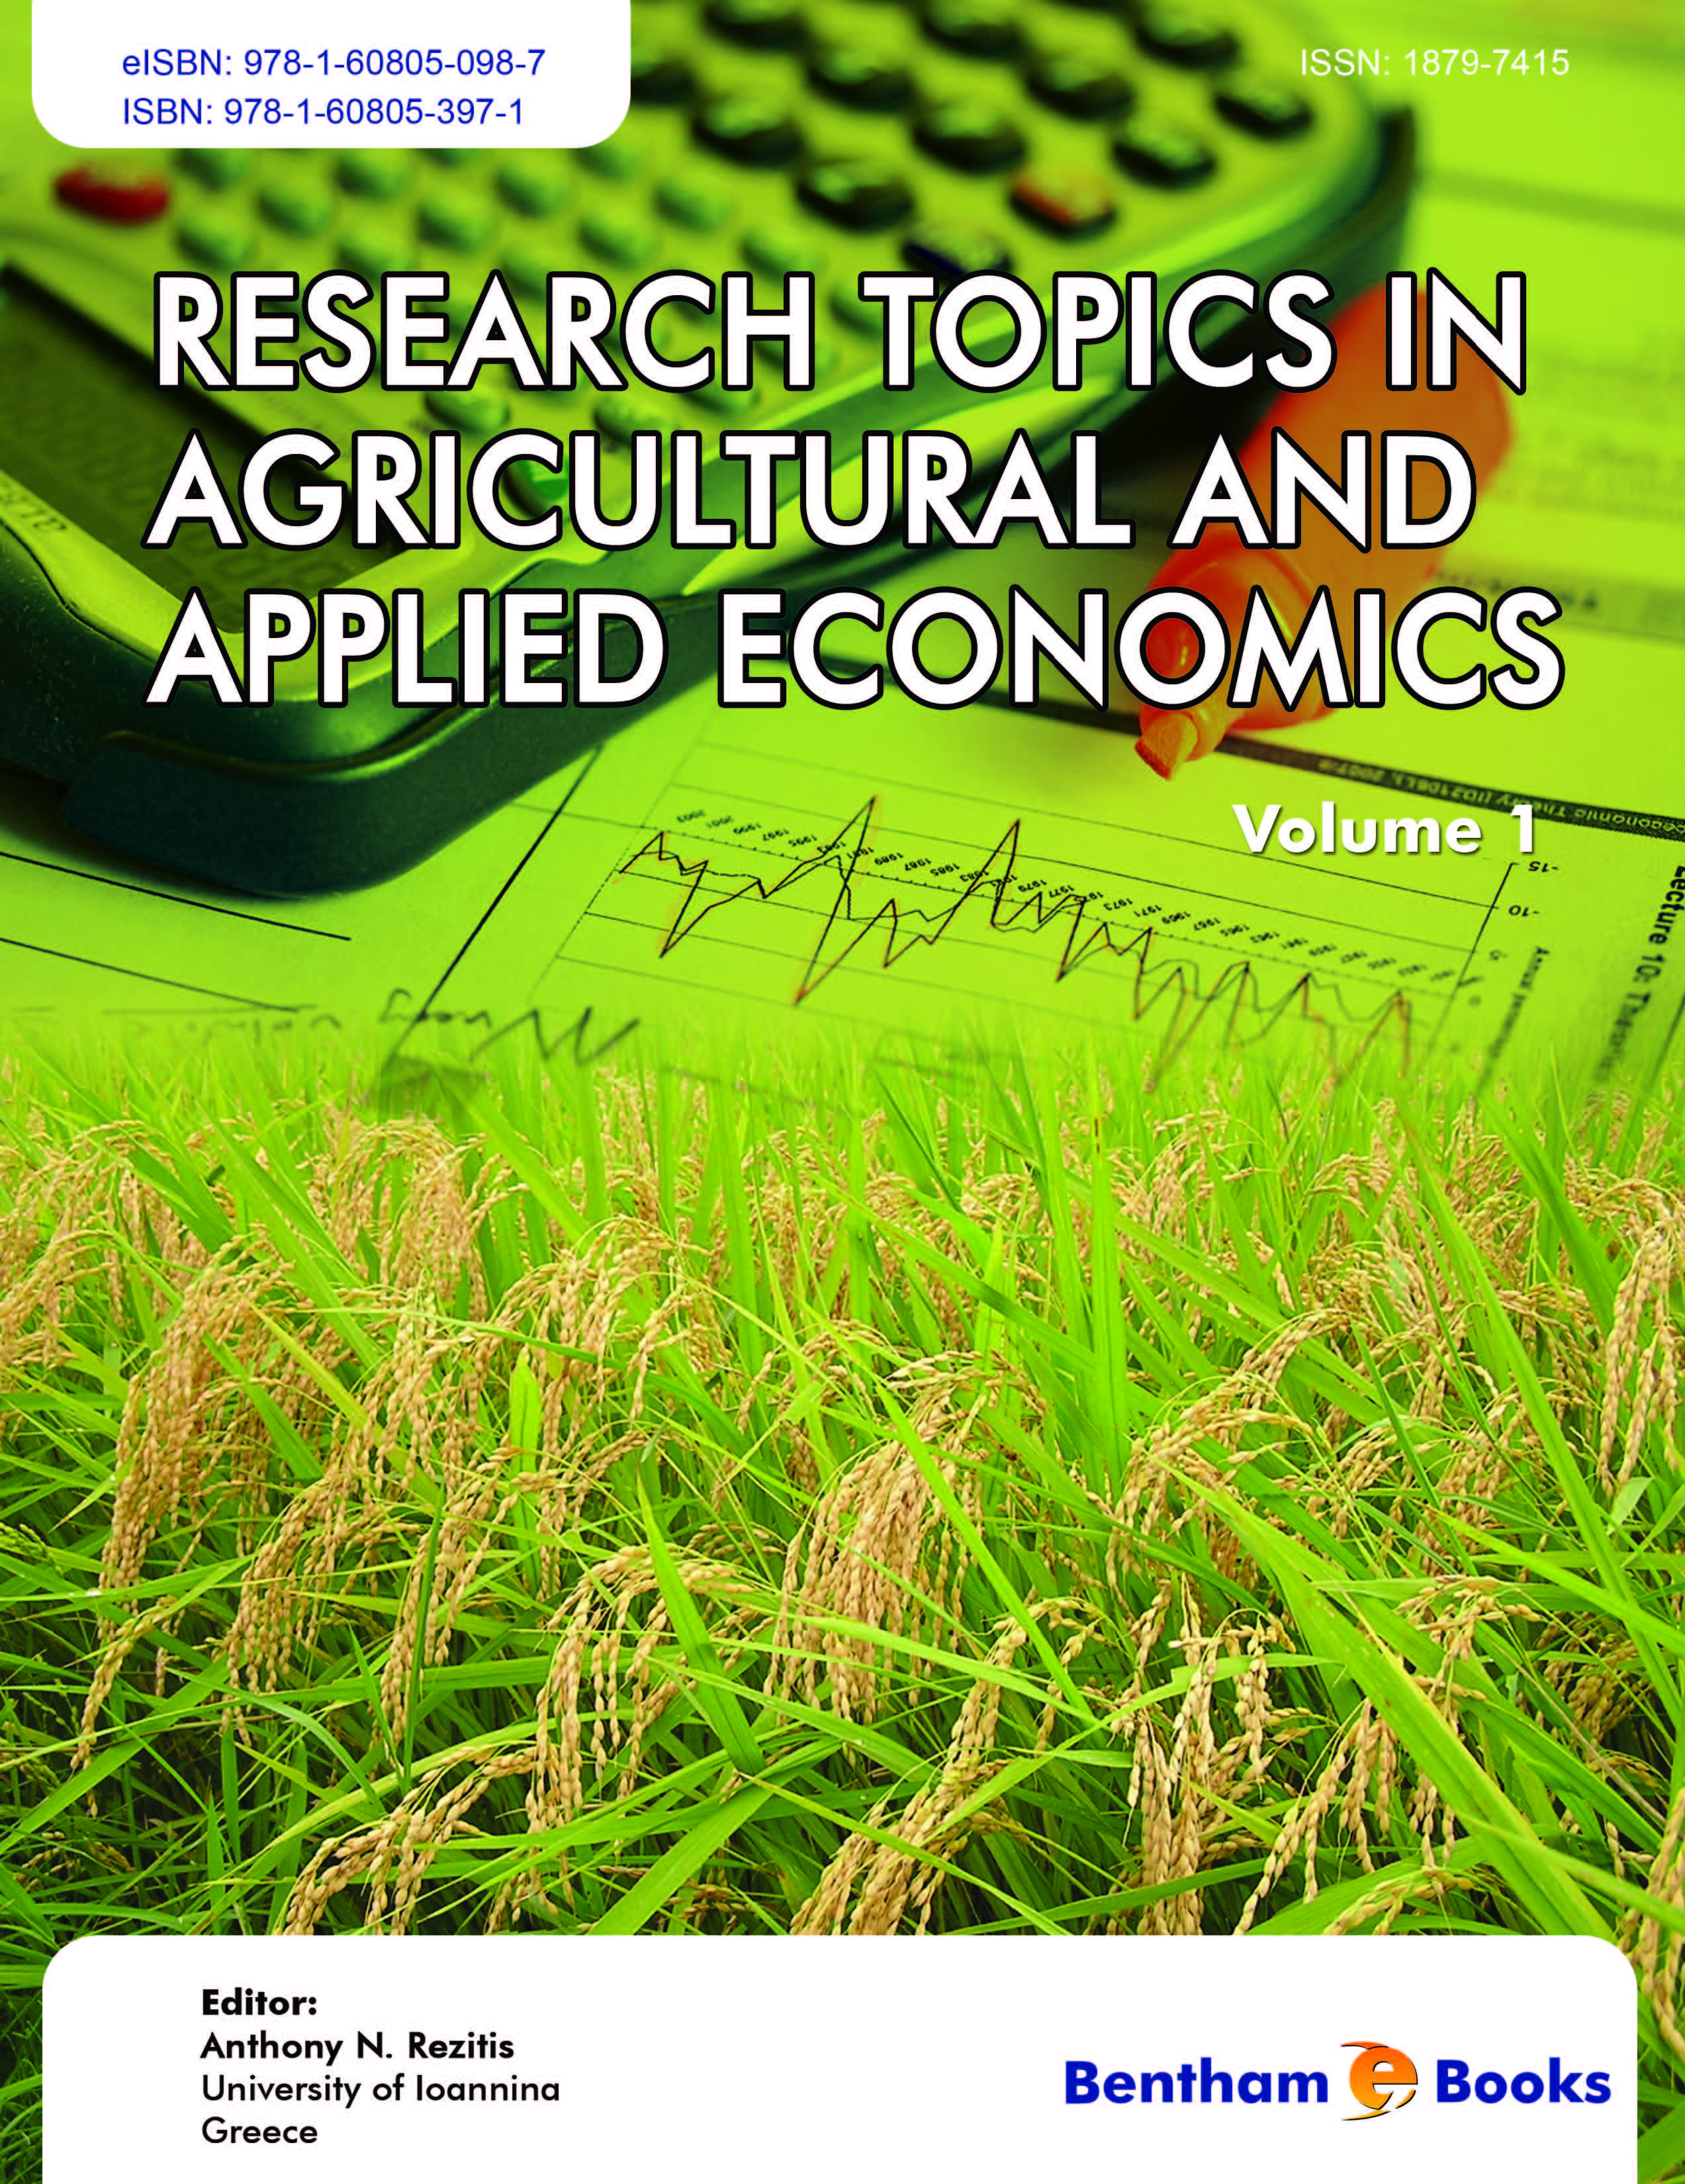 research proposal topics in agricultural economics